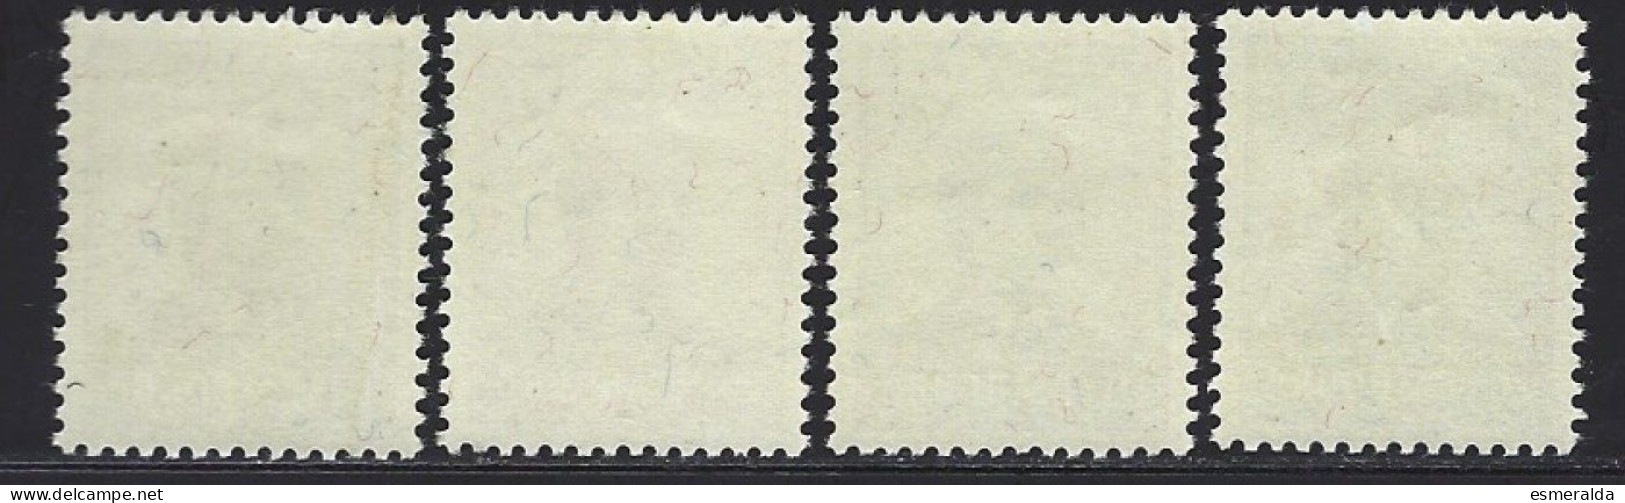 Luxembourg Yv 402/05,Caritas 1947,Michel Lentz,poète  **/mnh - Unused Stamps